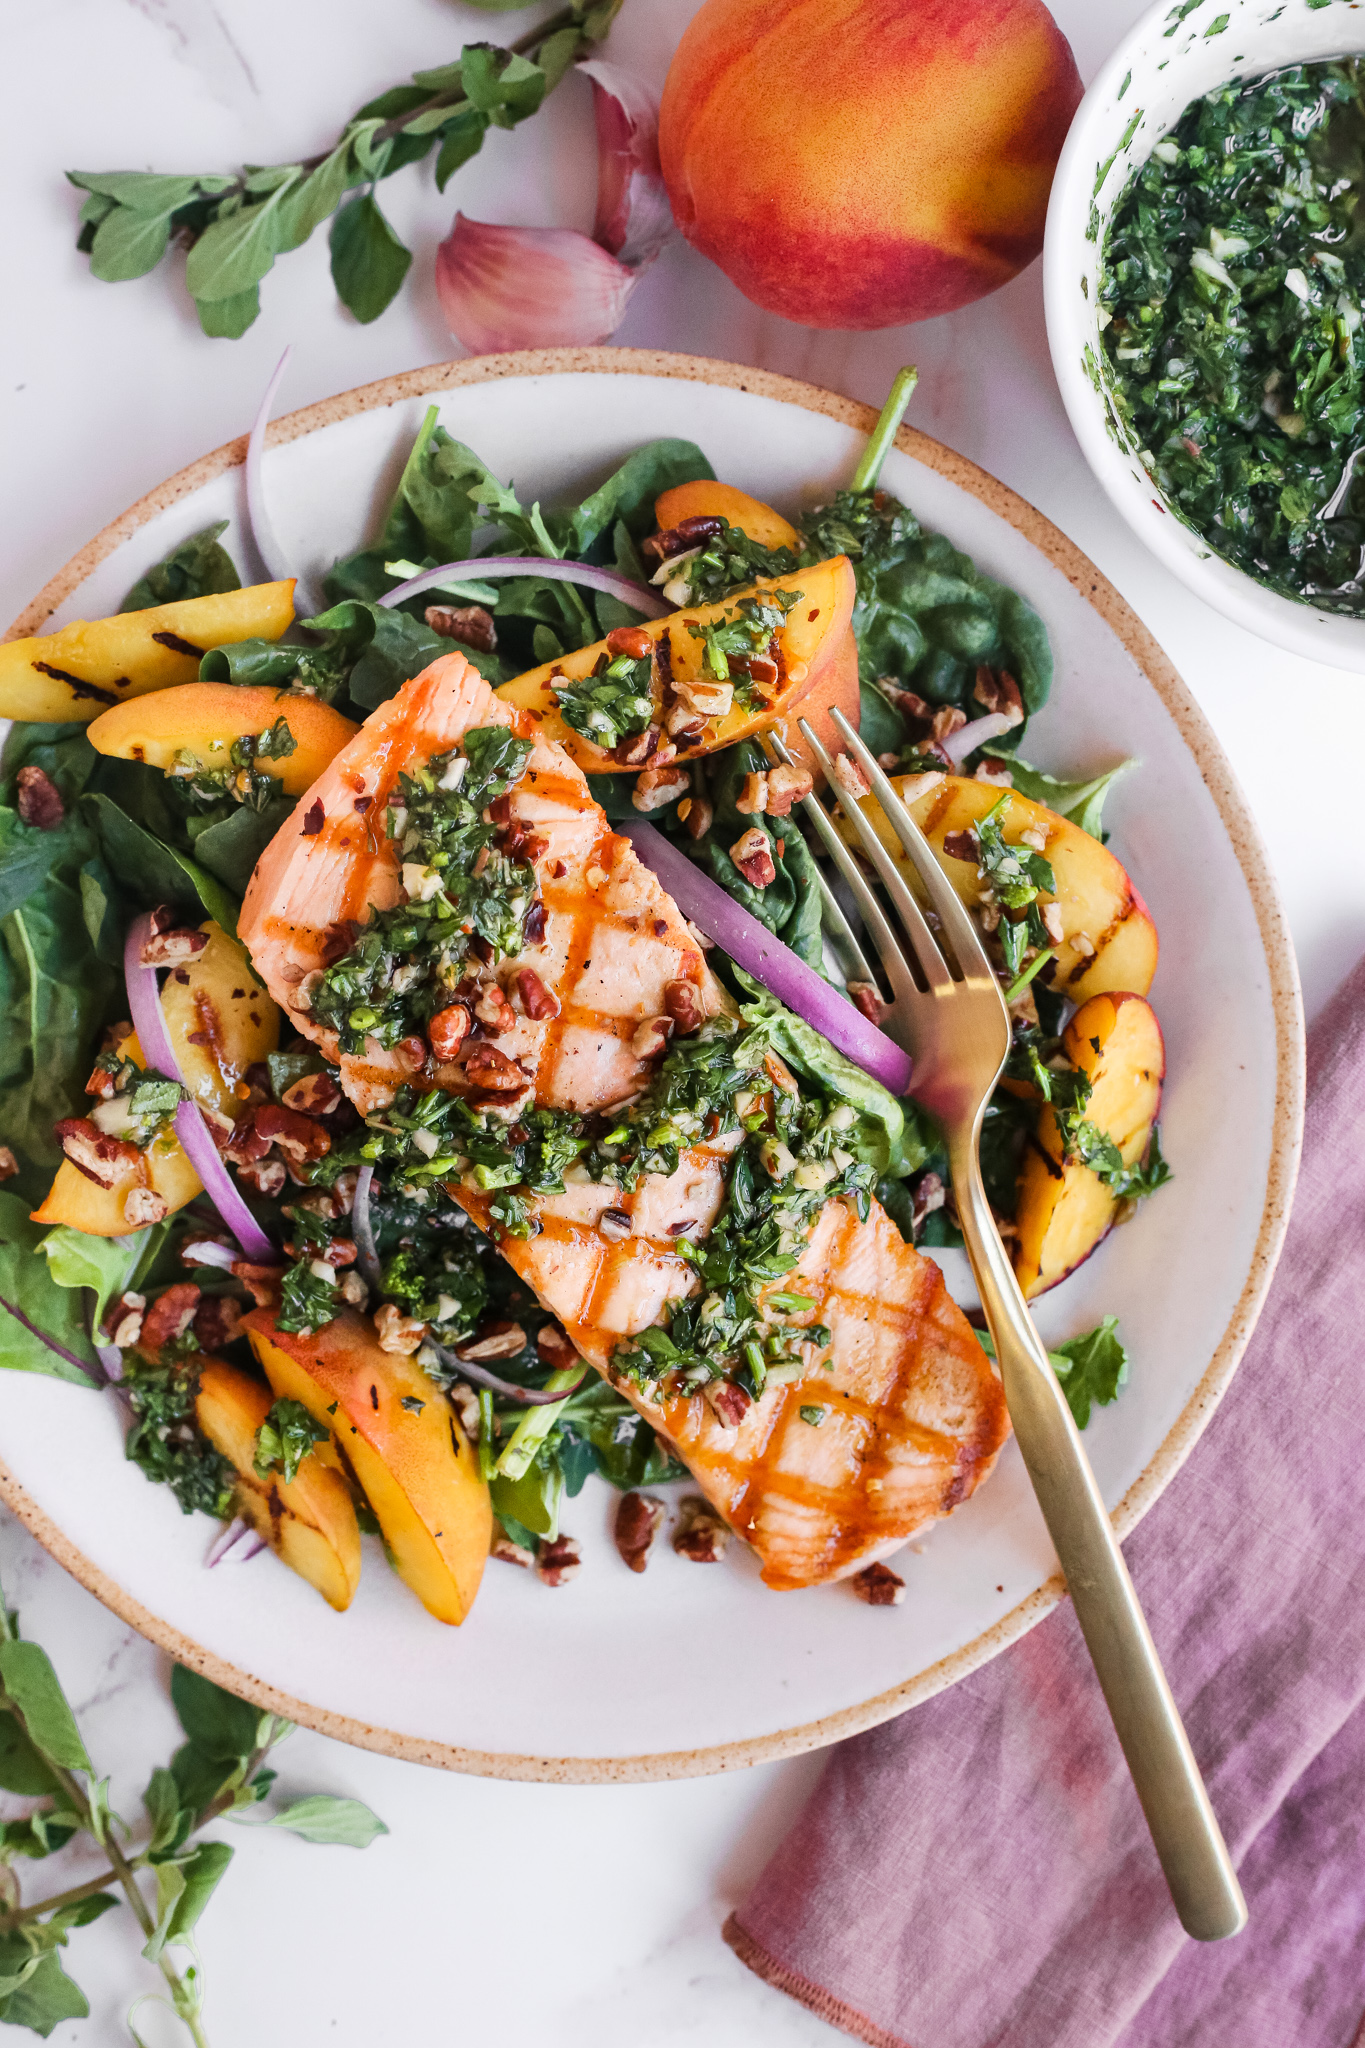 A plate of grilled salmon on top of salad greens, served with grilled peaches, chimichurri, sliced red onions, and chopped pecans